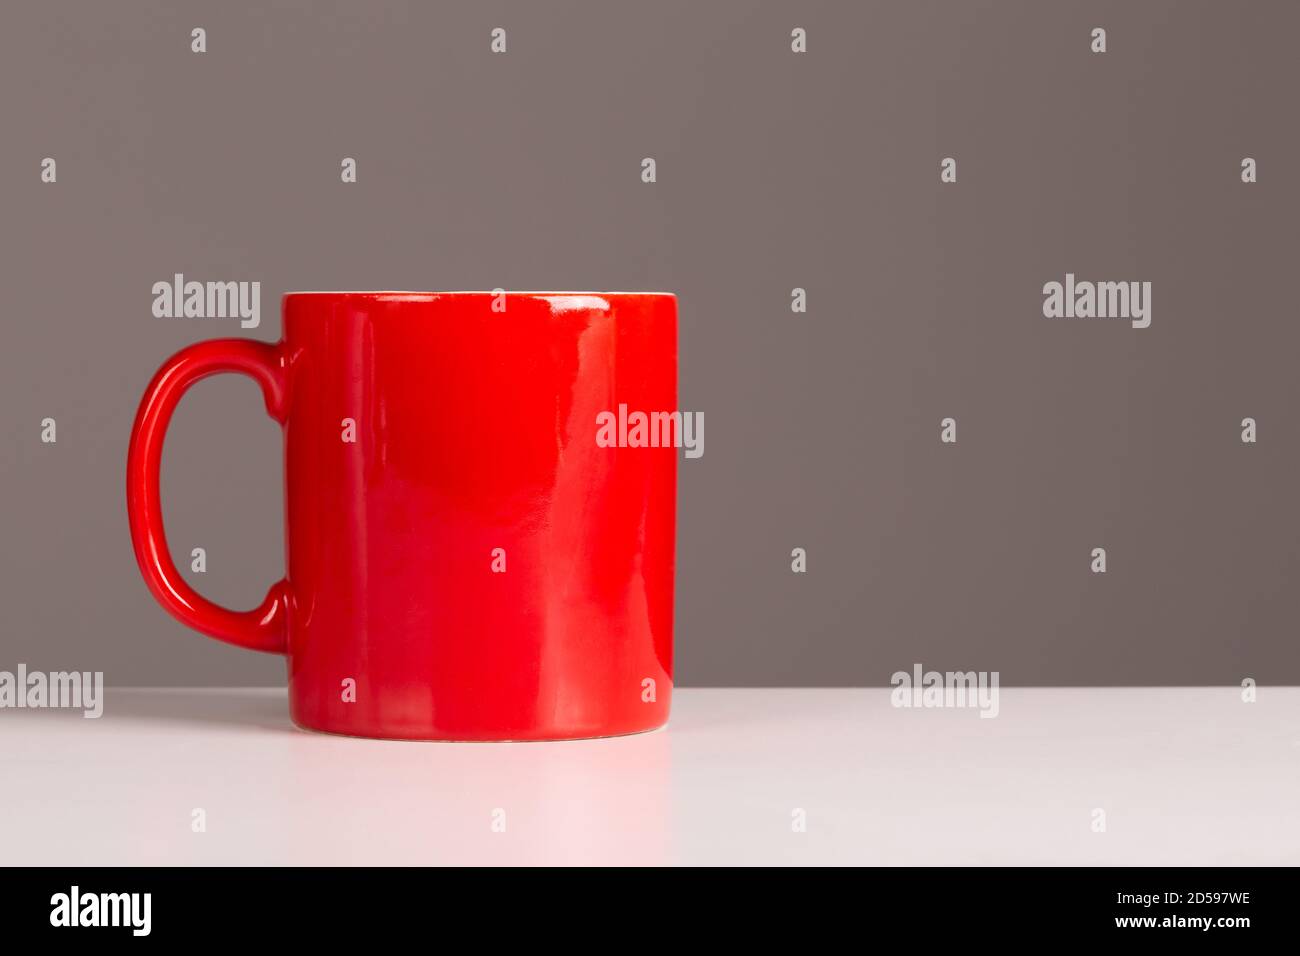 A bright red coffee or team mug on a neutral background with plenty of copyspace for designers. Stock Photo